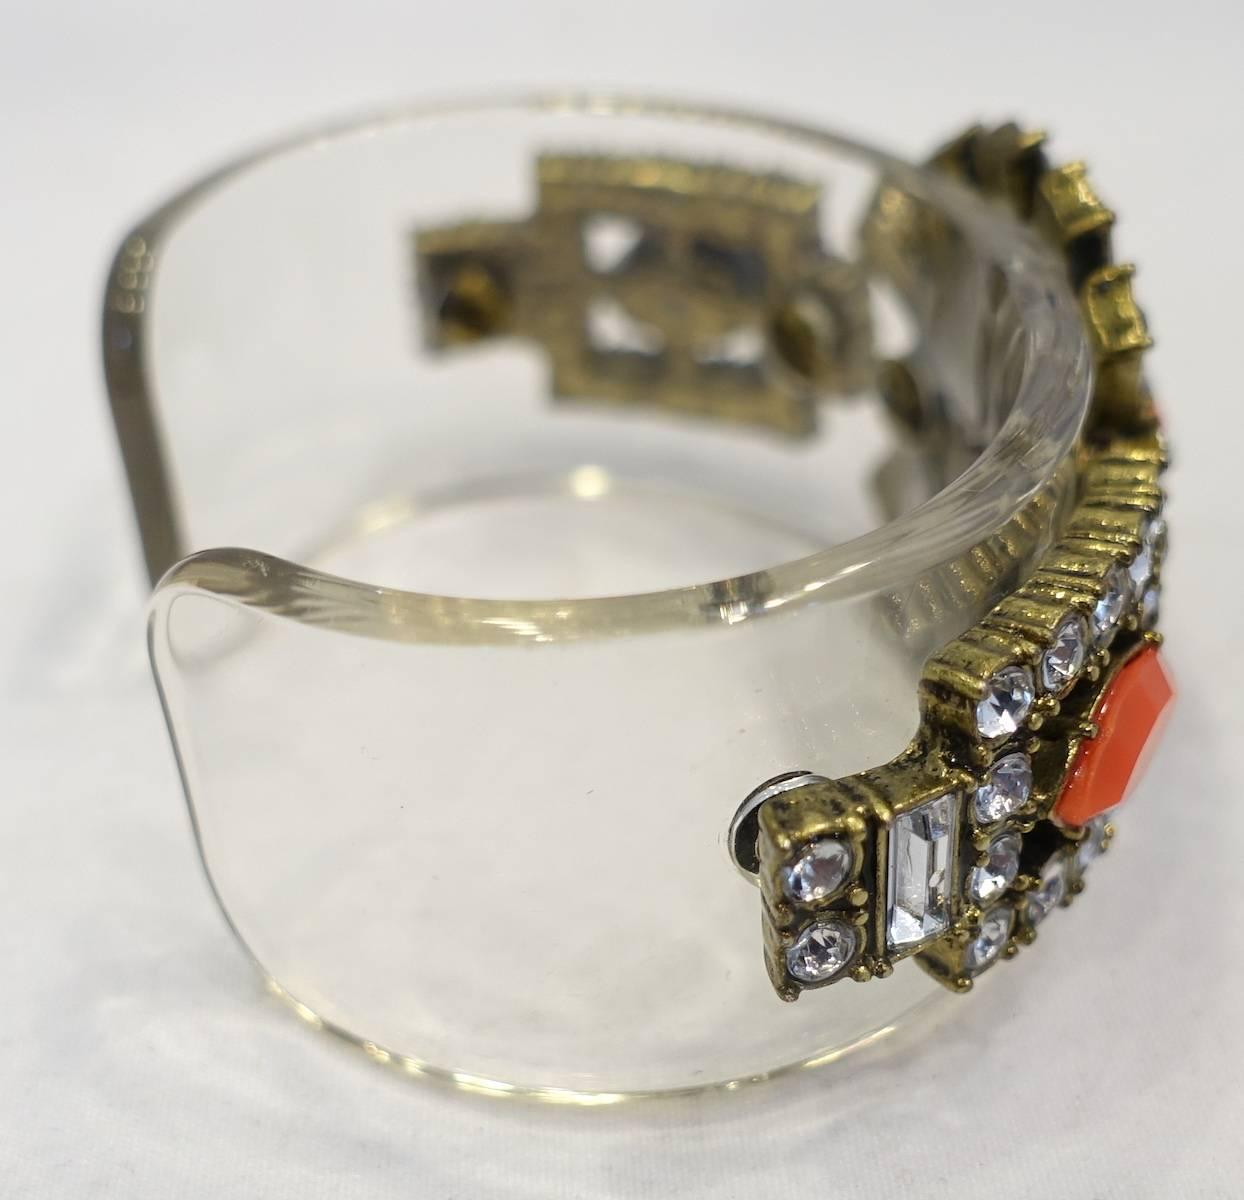 This deco style vintage 1960s bracelet is designed with faux coral surrounded with clear crystals on a Lucite cuff.  This cuff measures 5-1/2” around the inside x 1” and is in excellent condition.